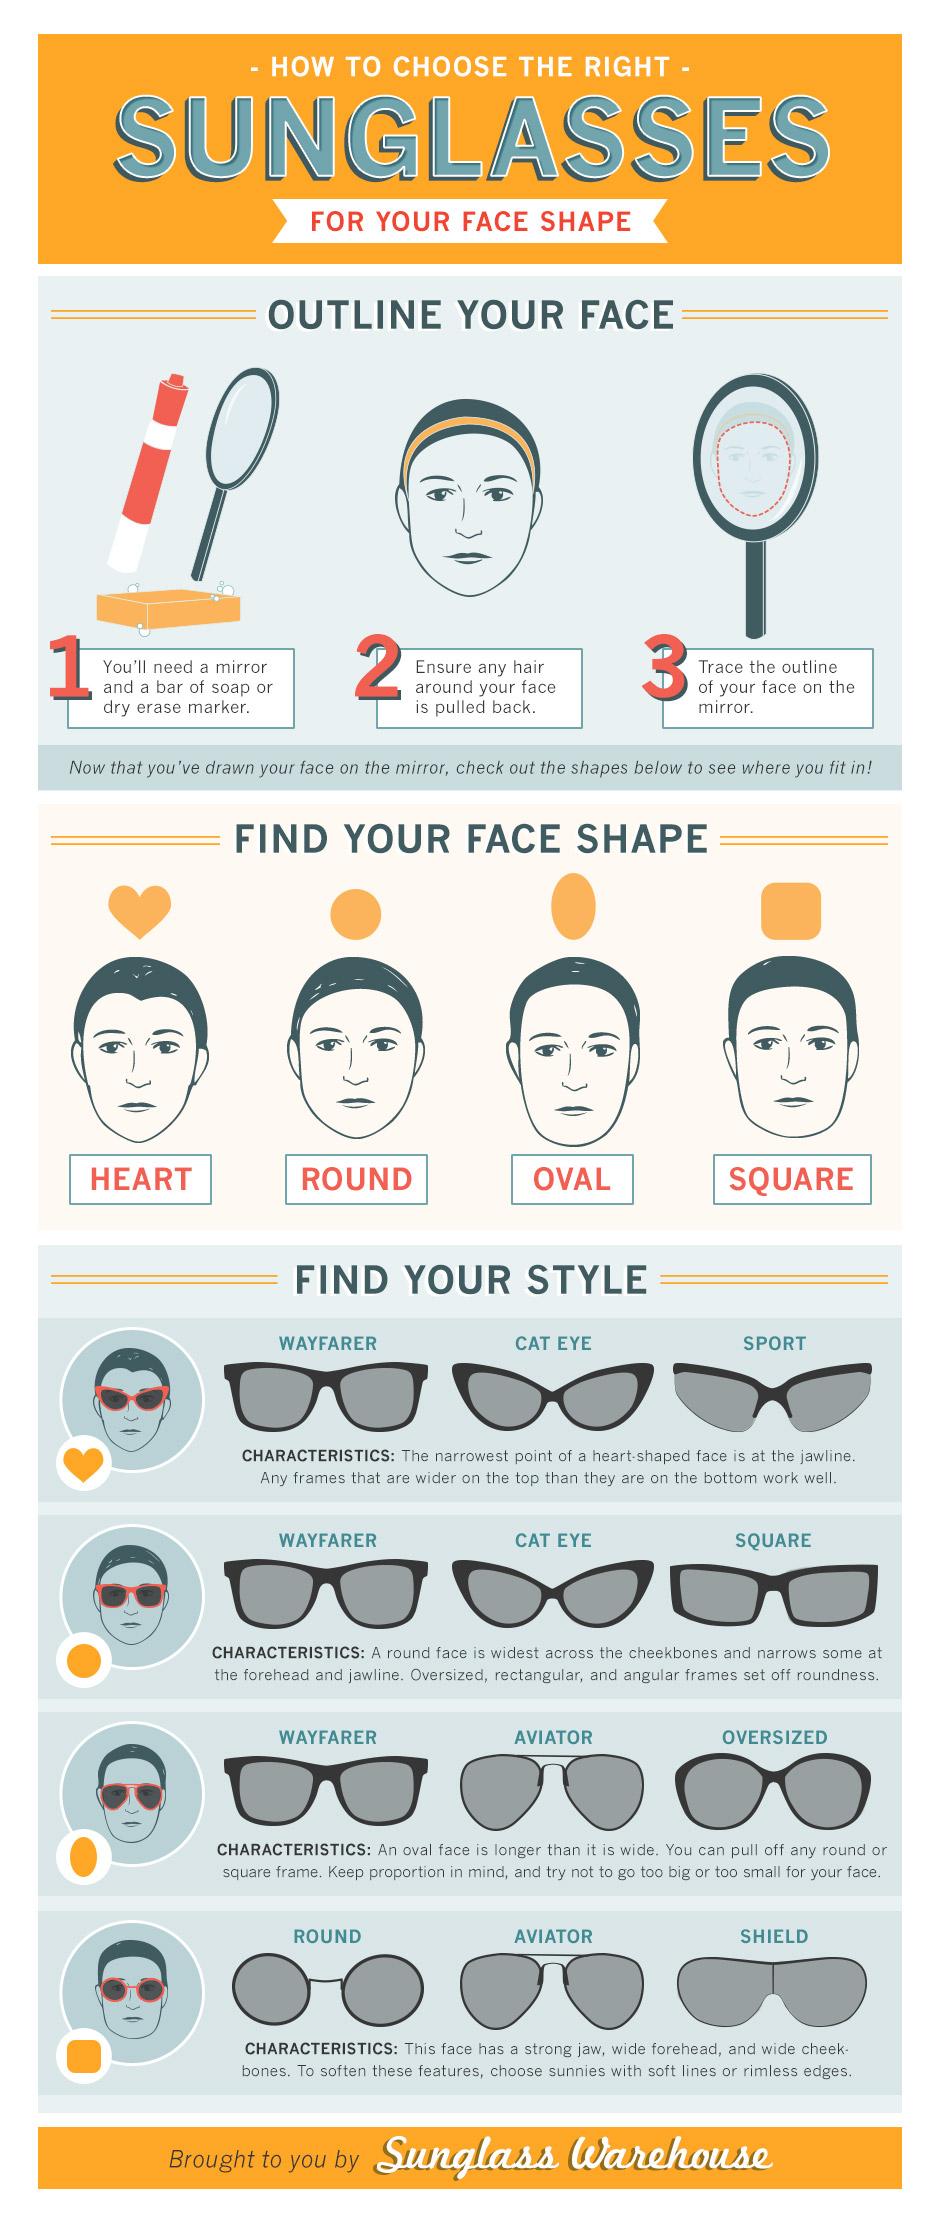 Finding the right sunglasses for your face shape